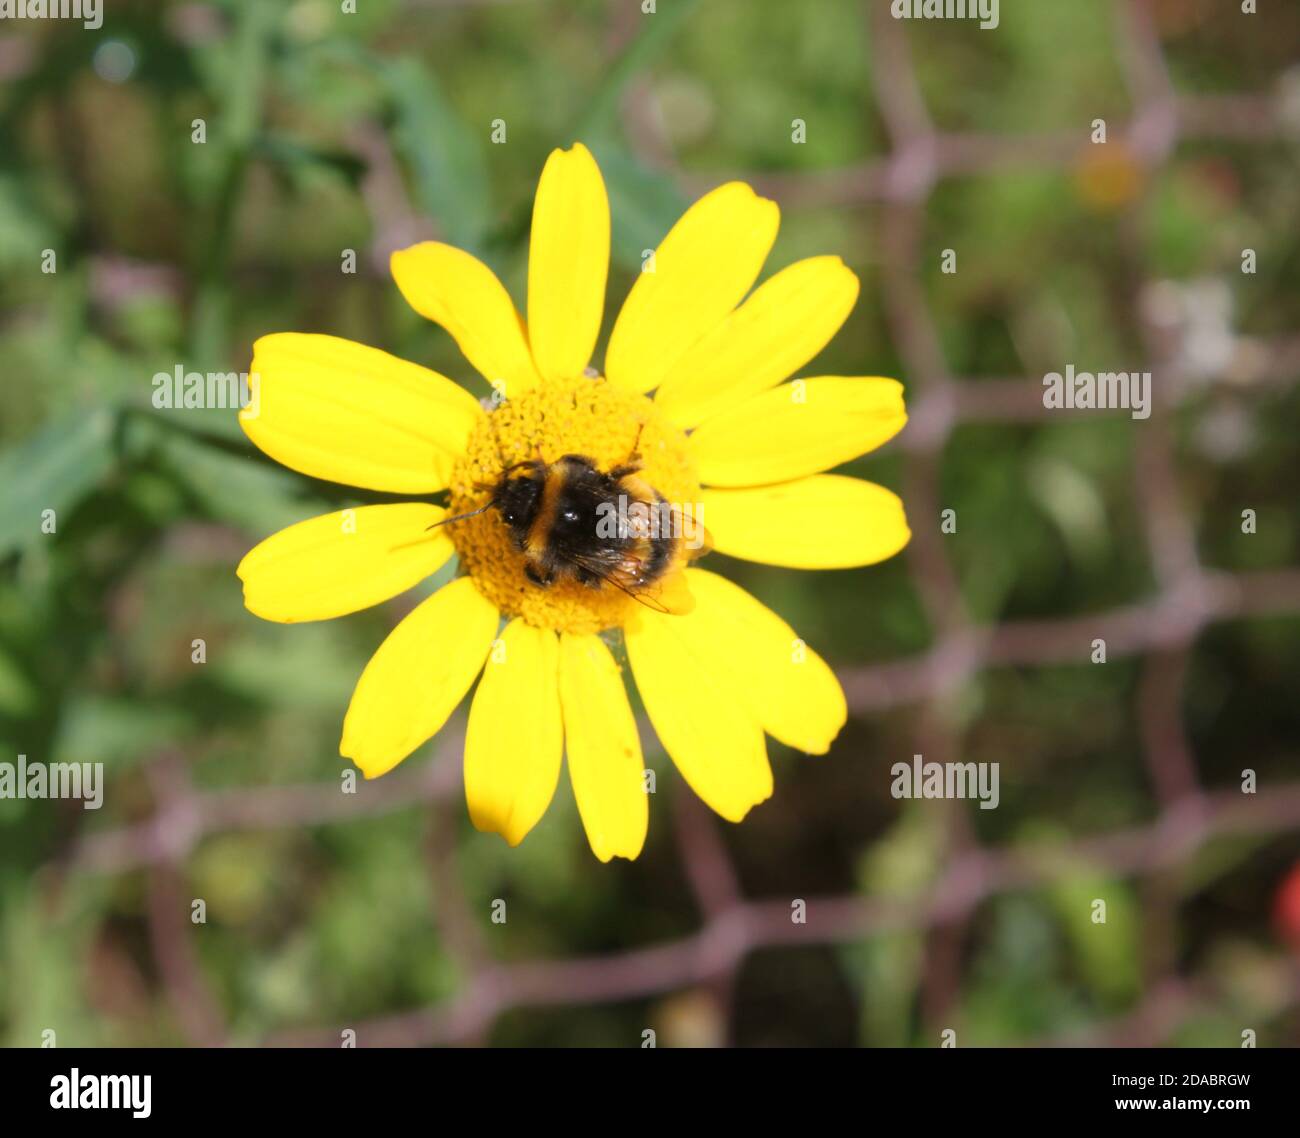 Bumble bee sitting on large yellow flower head. Yellow Daisy like flower growing through garden fence. Summer plants United Kingdom (UK). Stock Photo